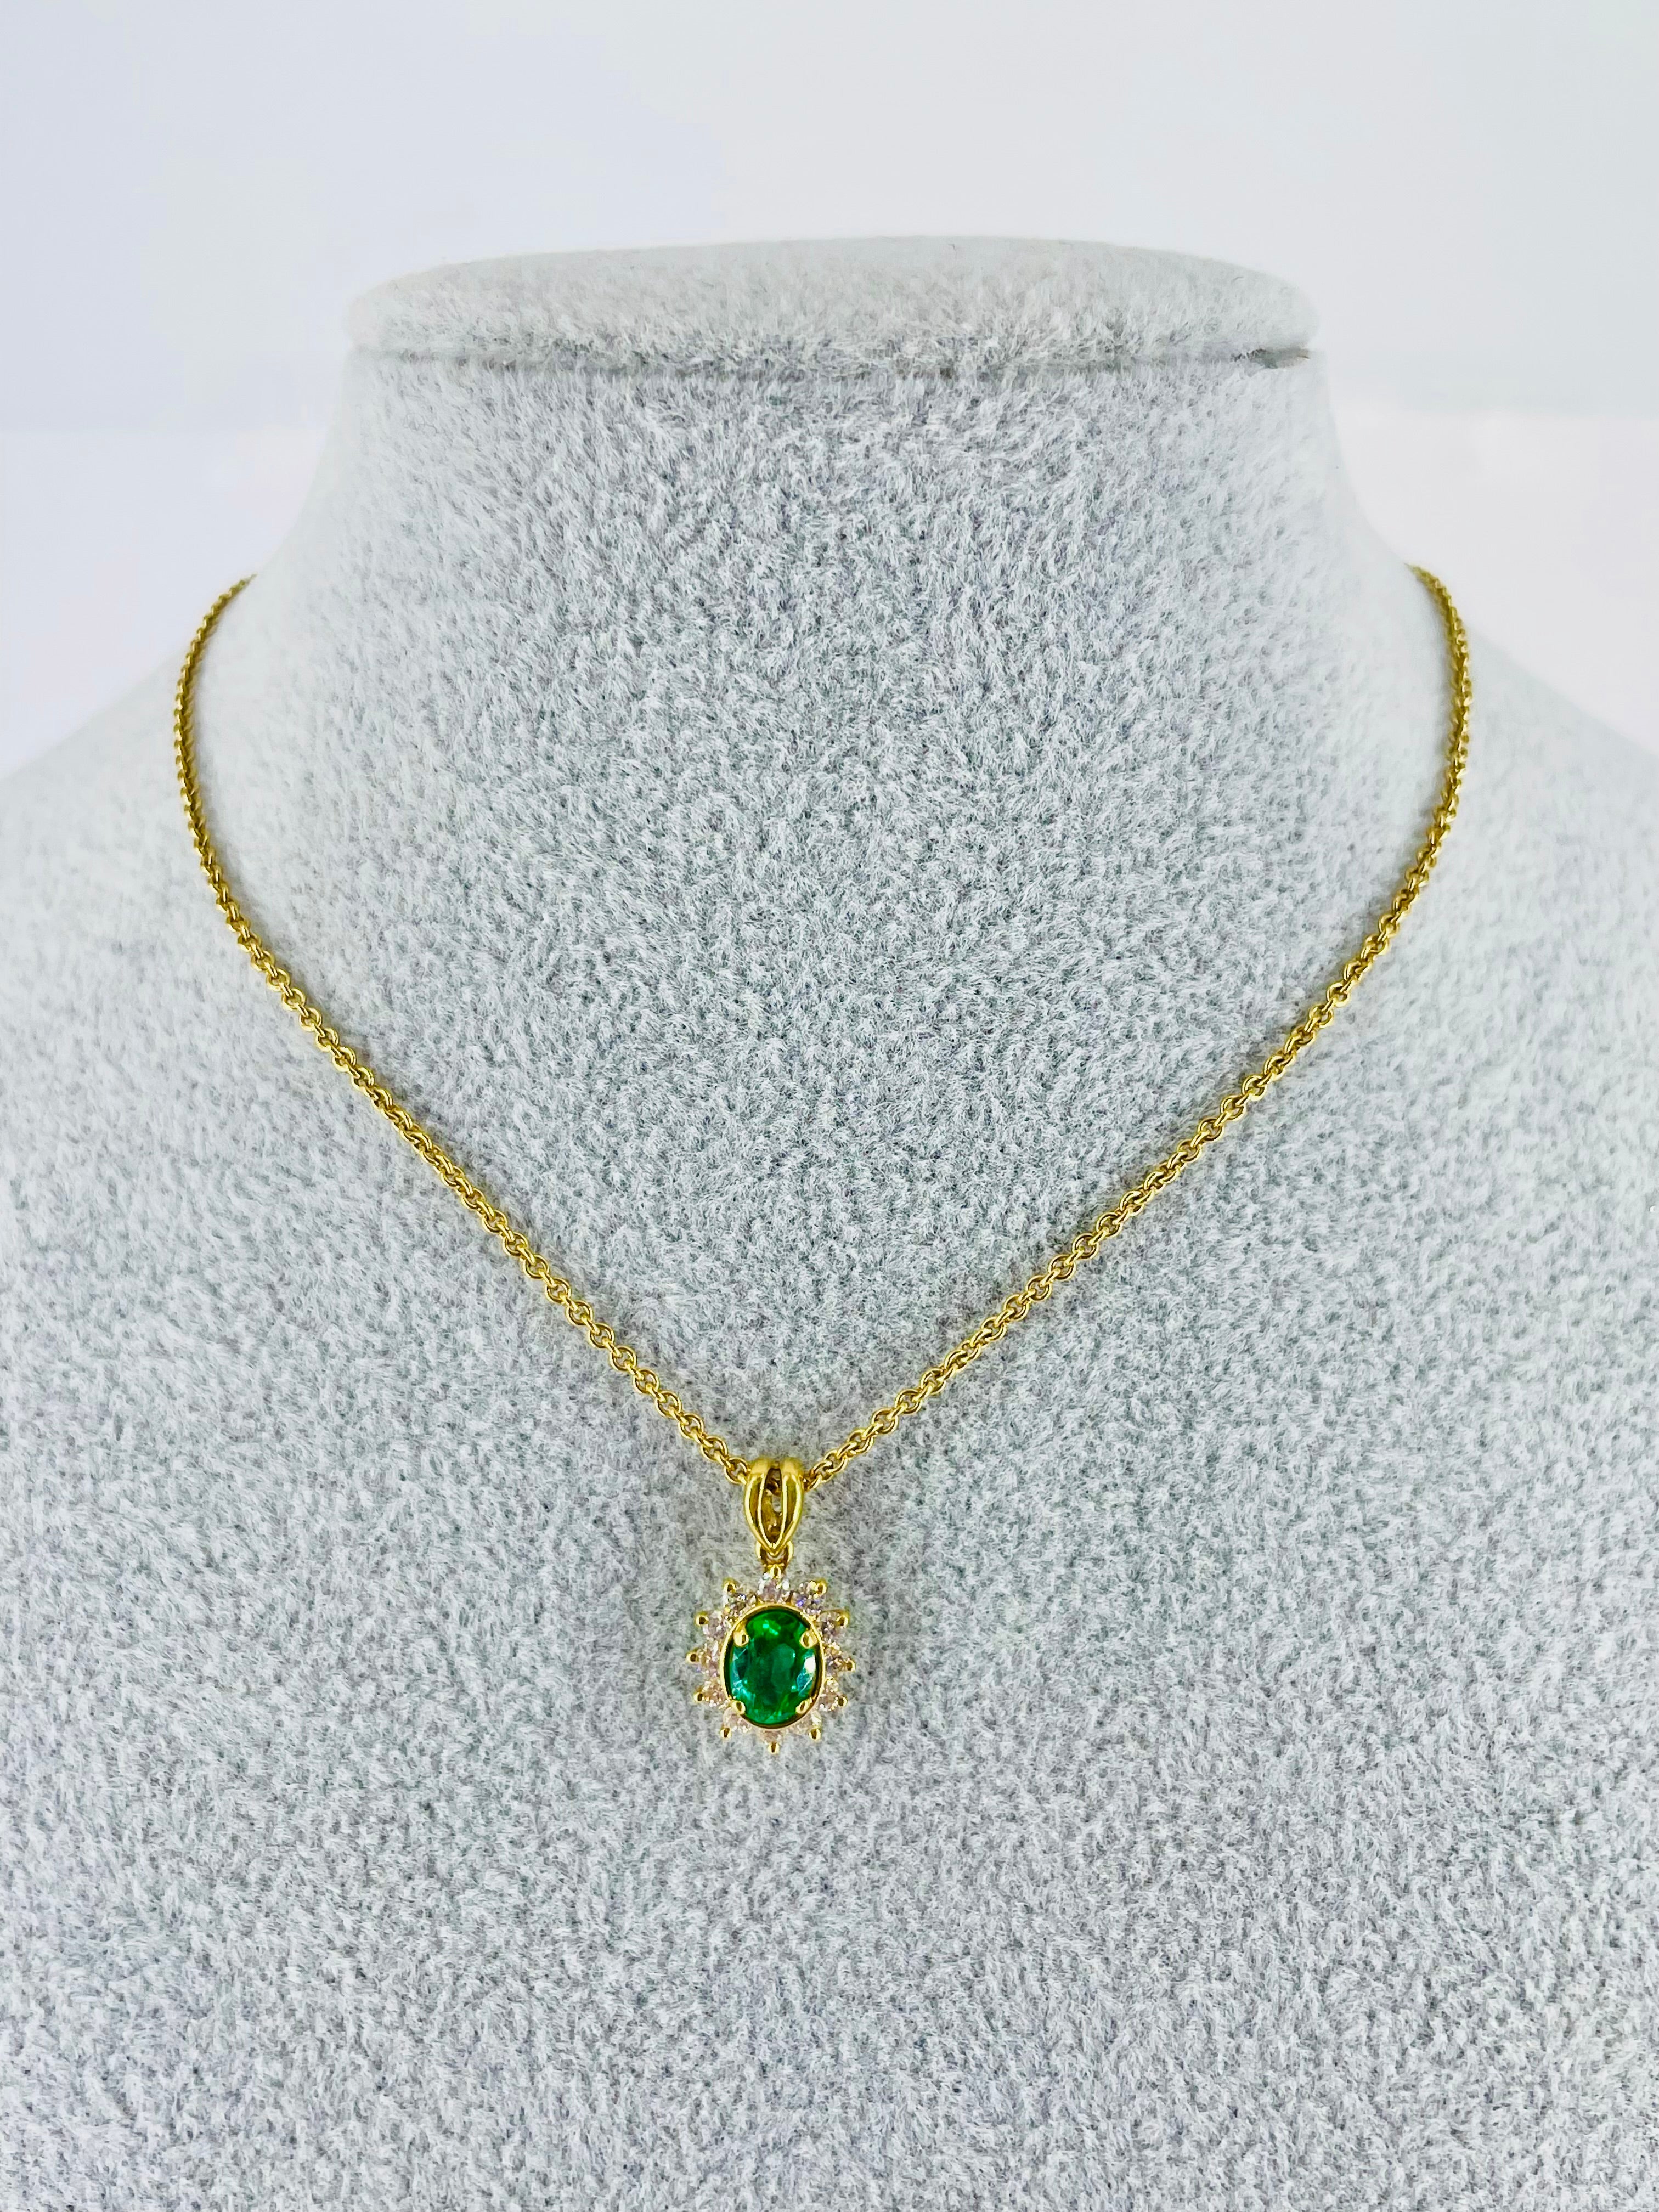 This beautiful pendant by Kurt Wayne features a rich green 0.56 carat oval shaped emerald. The center gemstone is framed by 0.35 carats of round diamonds. The decadent green is the perfect combination with the 18K yellow gold setting and chain. The